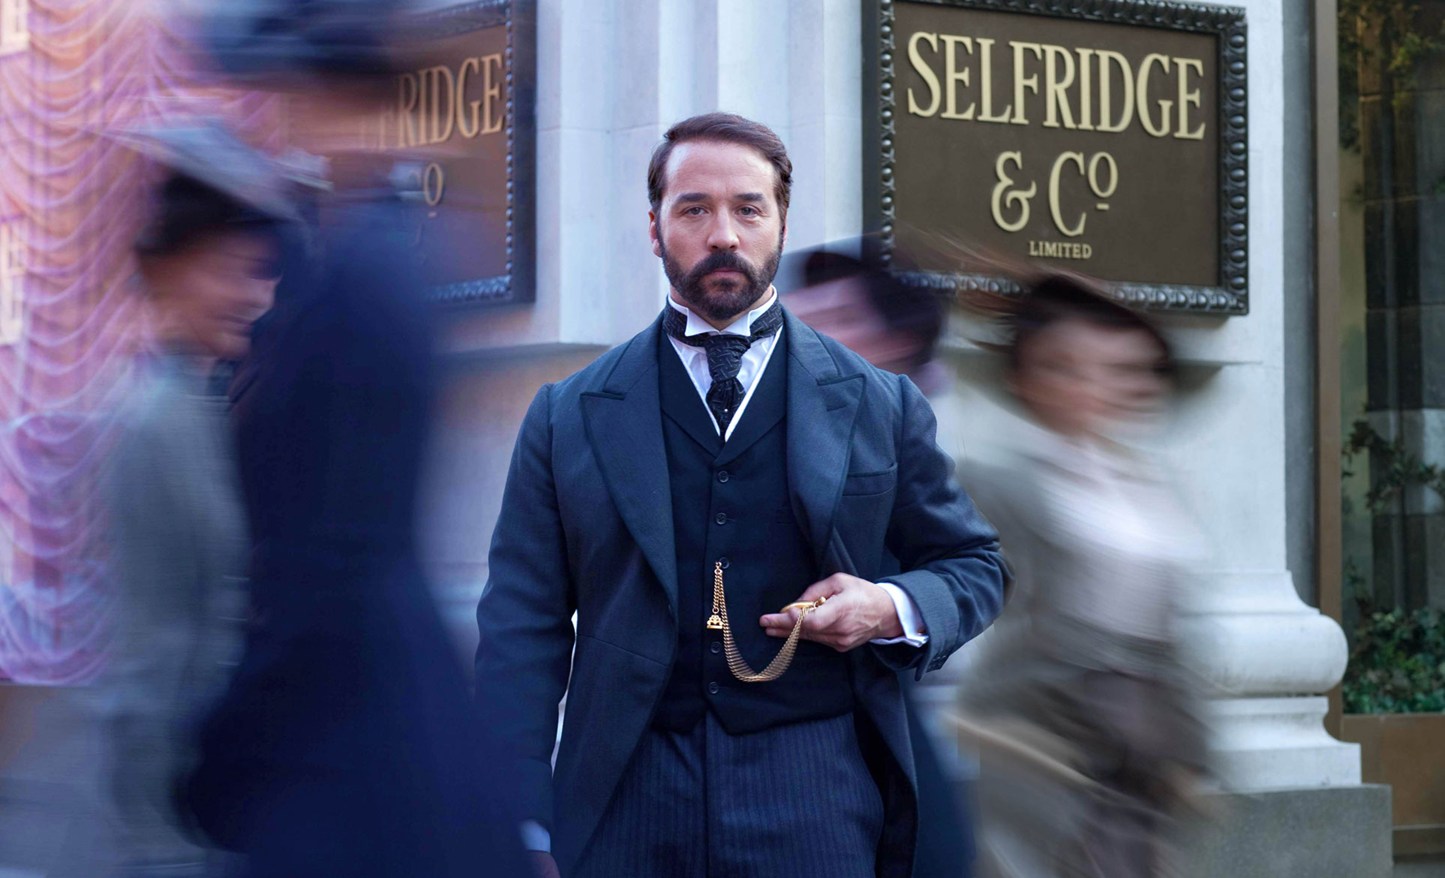 A man standing in front of Selfridge and Co sign